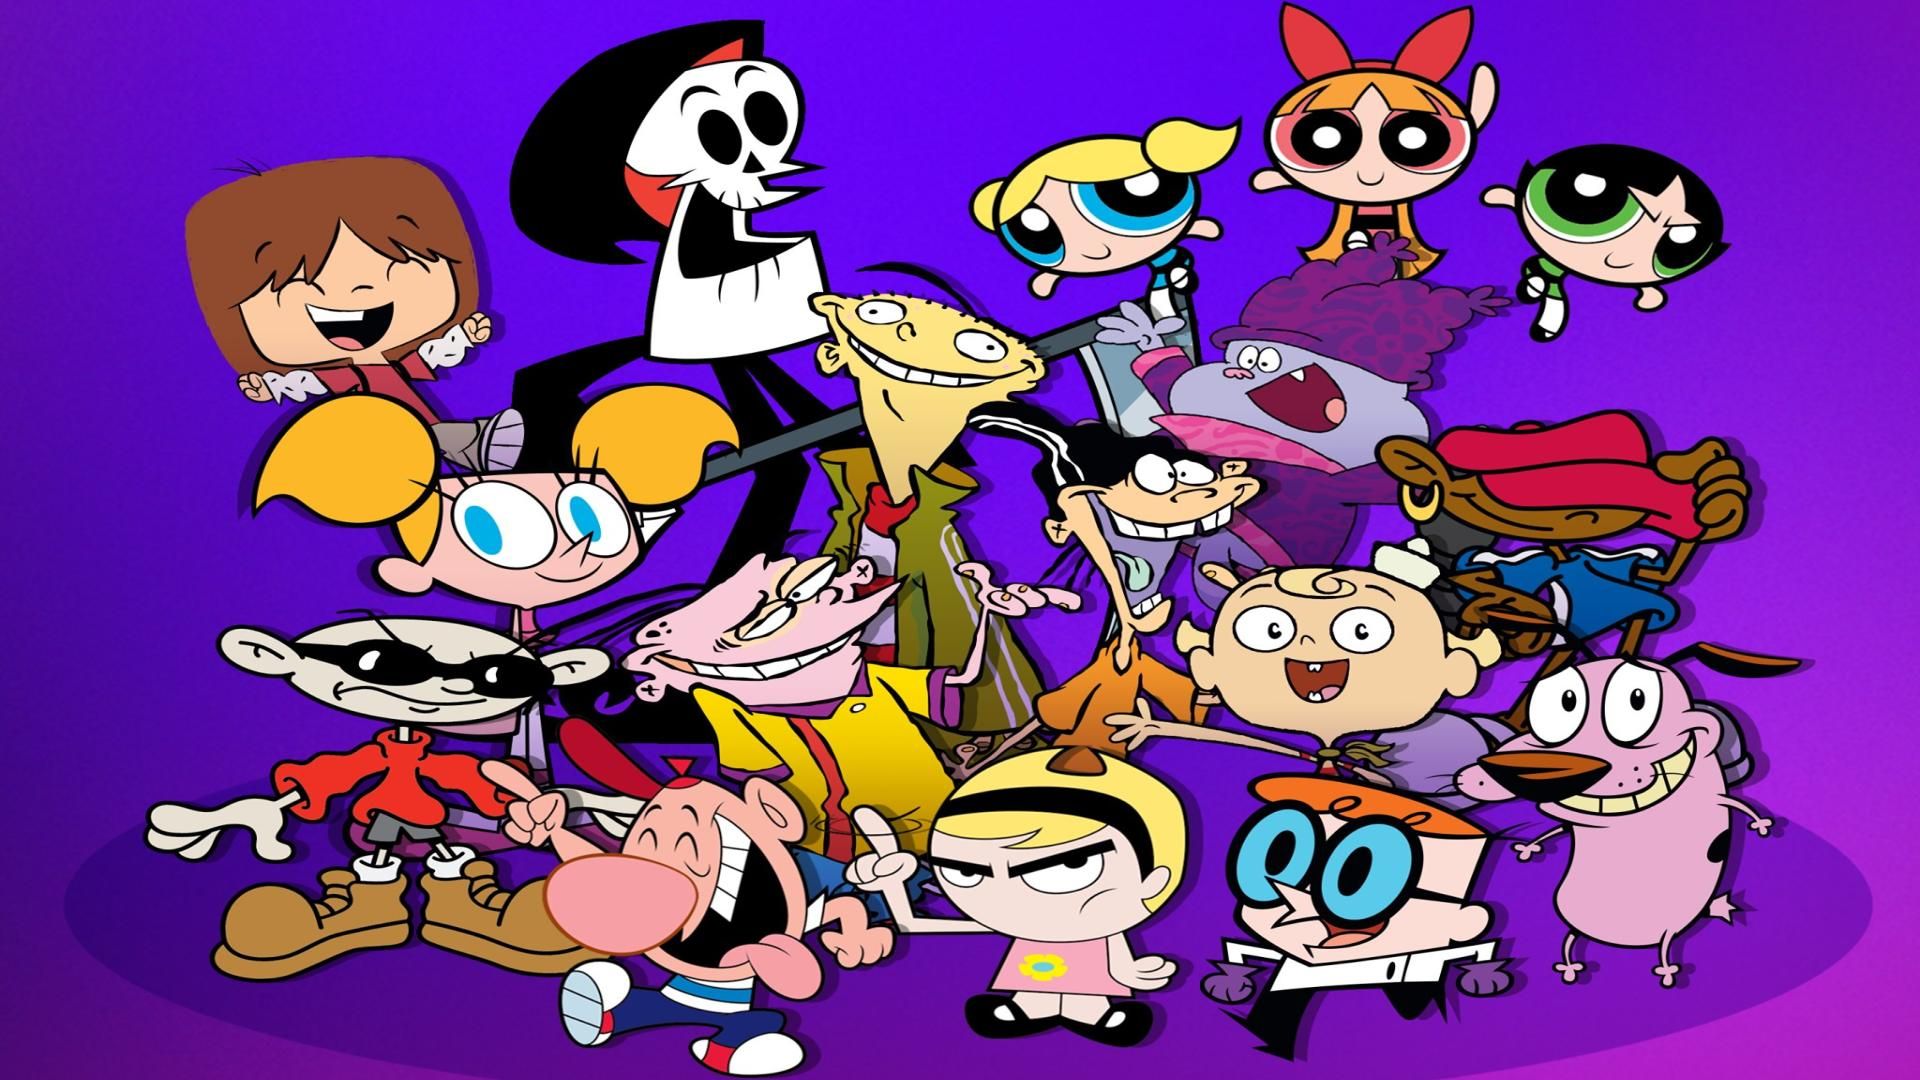 Does WB Own Cartoon Network & What Franchises Could Make MultiVersus?